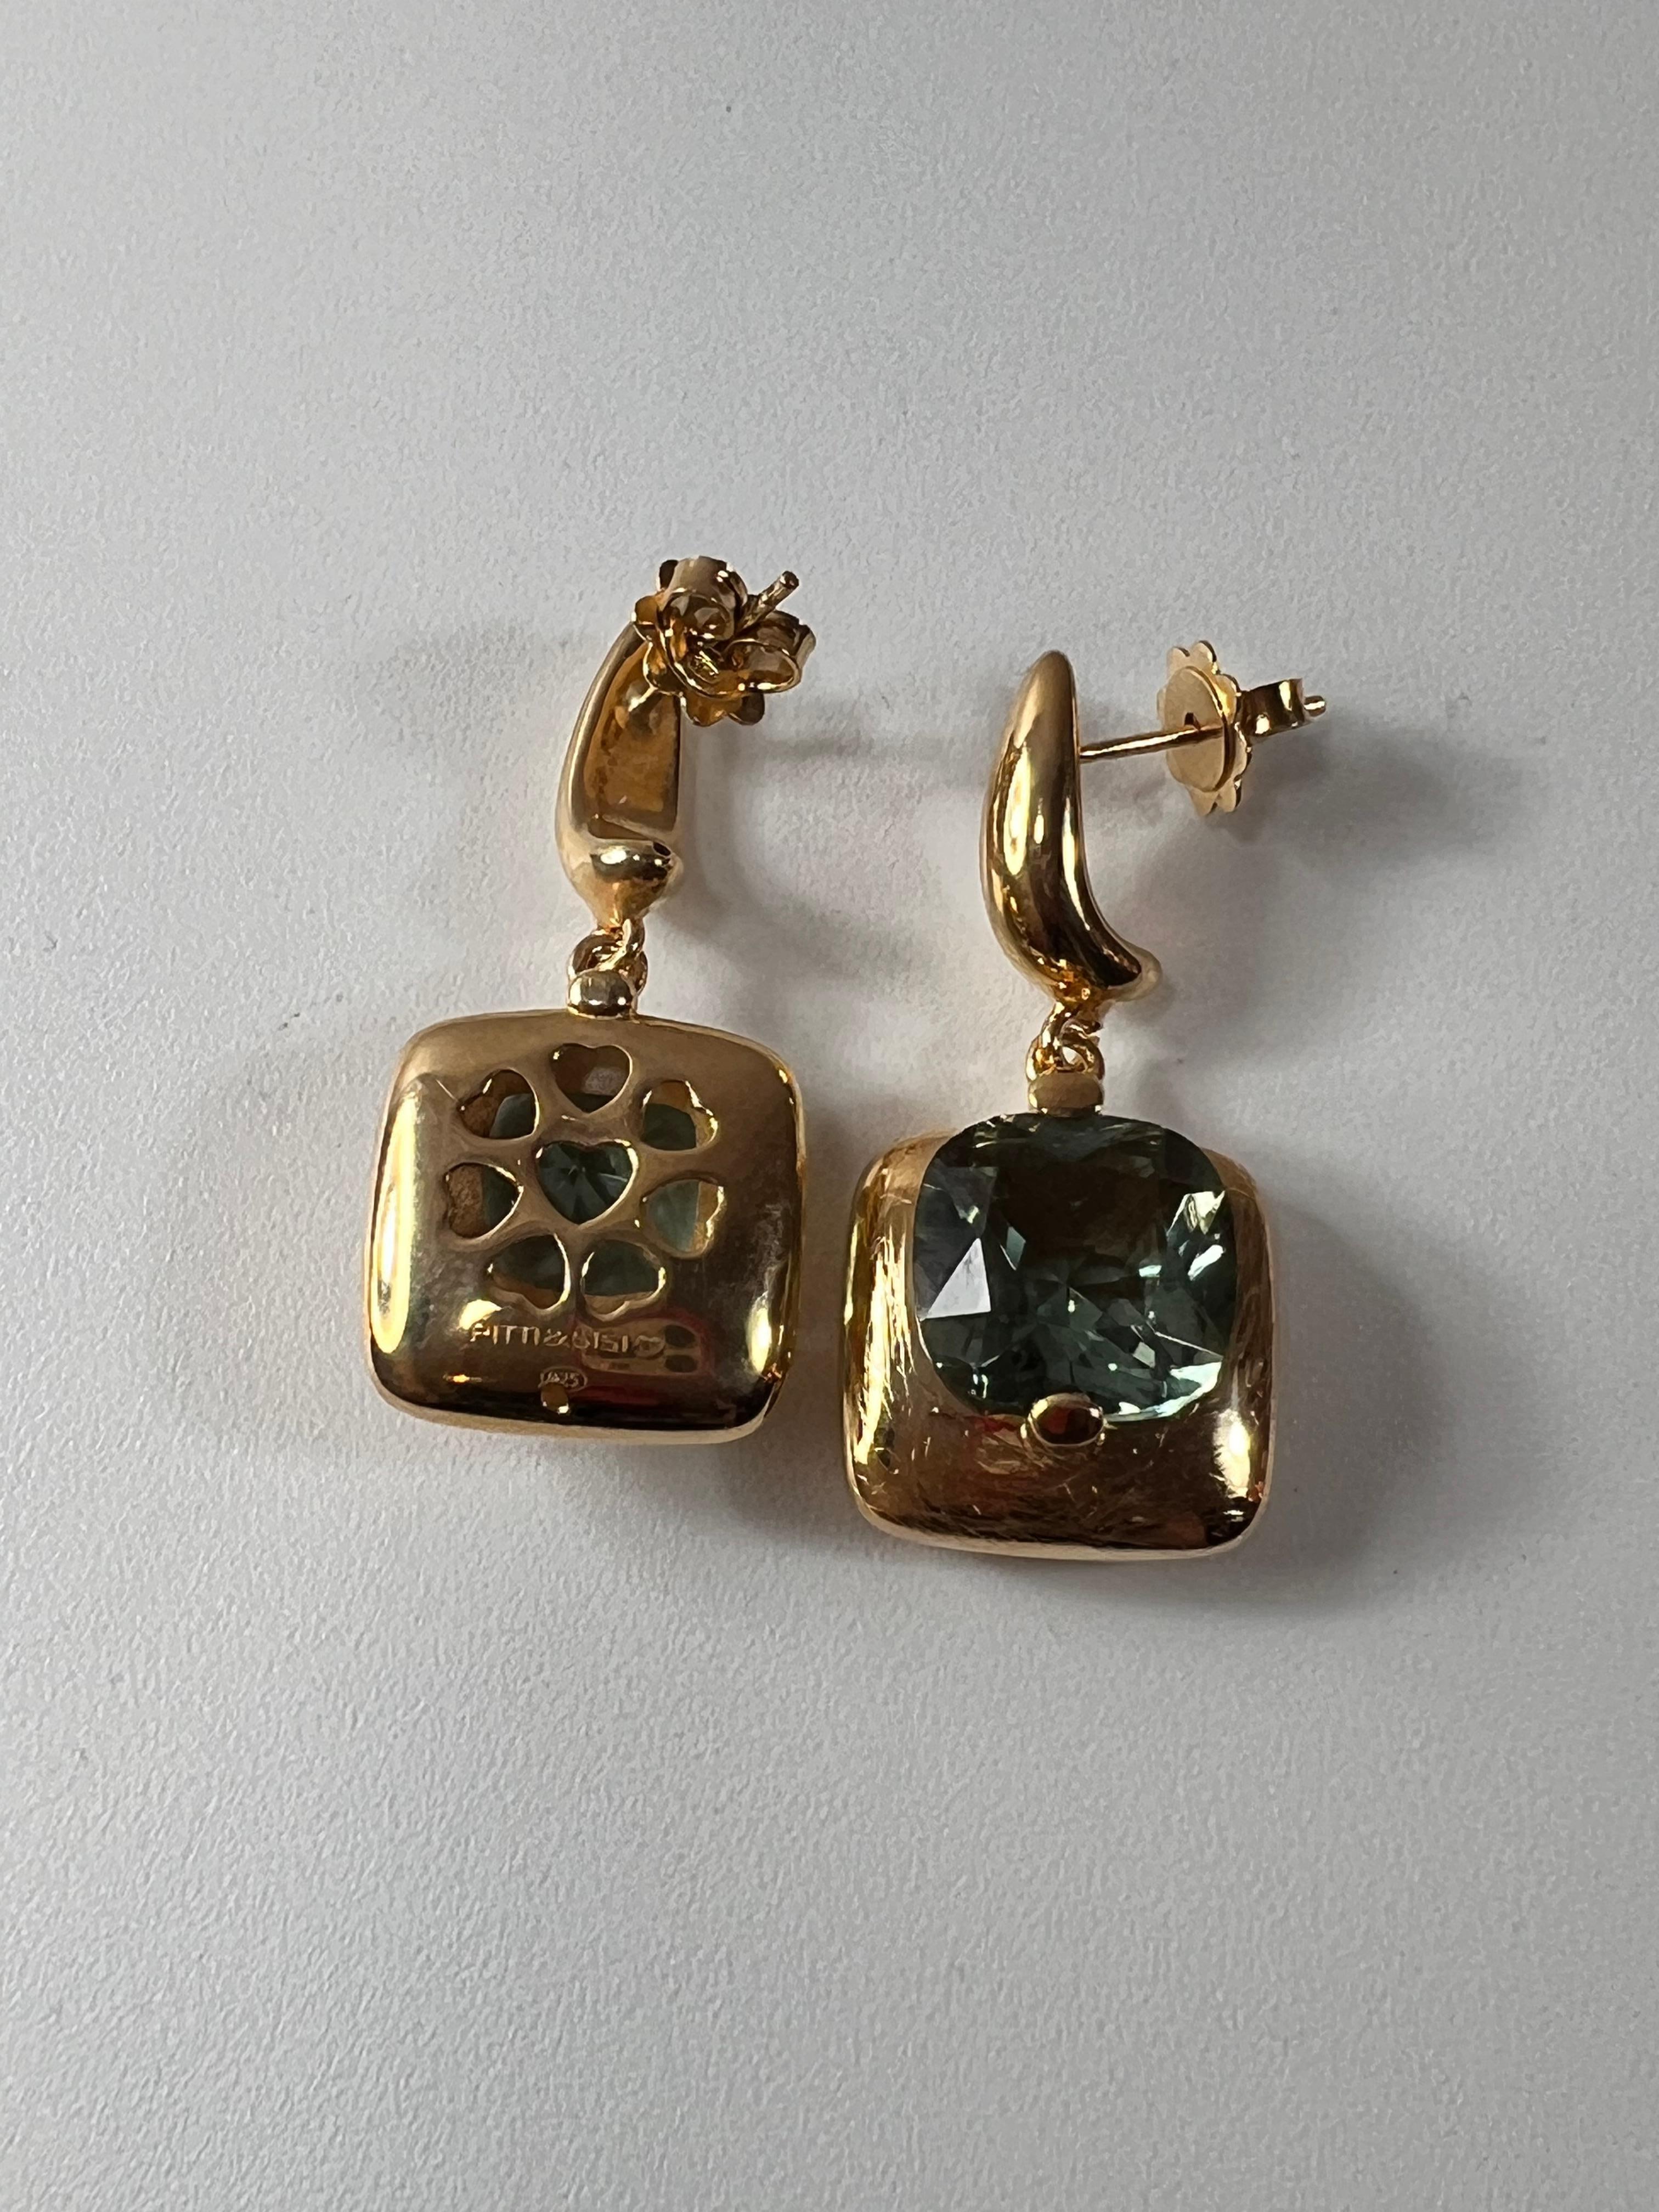  Earrings with carré cut quartz stone in gold plated silver cognac finish In New Condition For Sale In Bilbao, ES